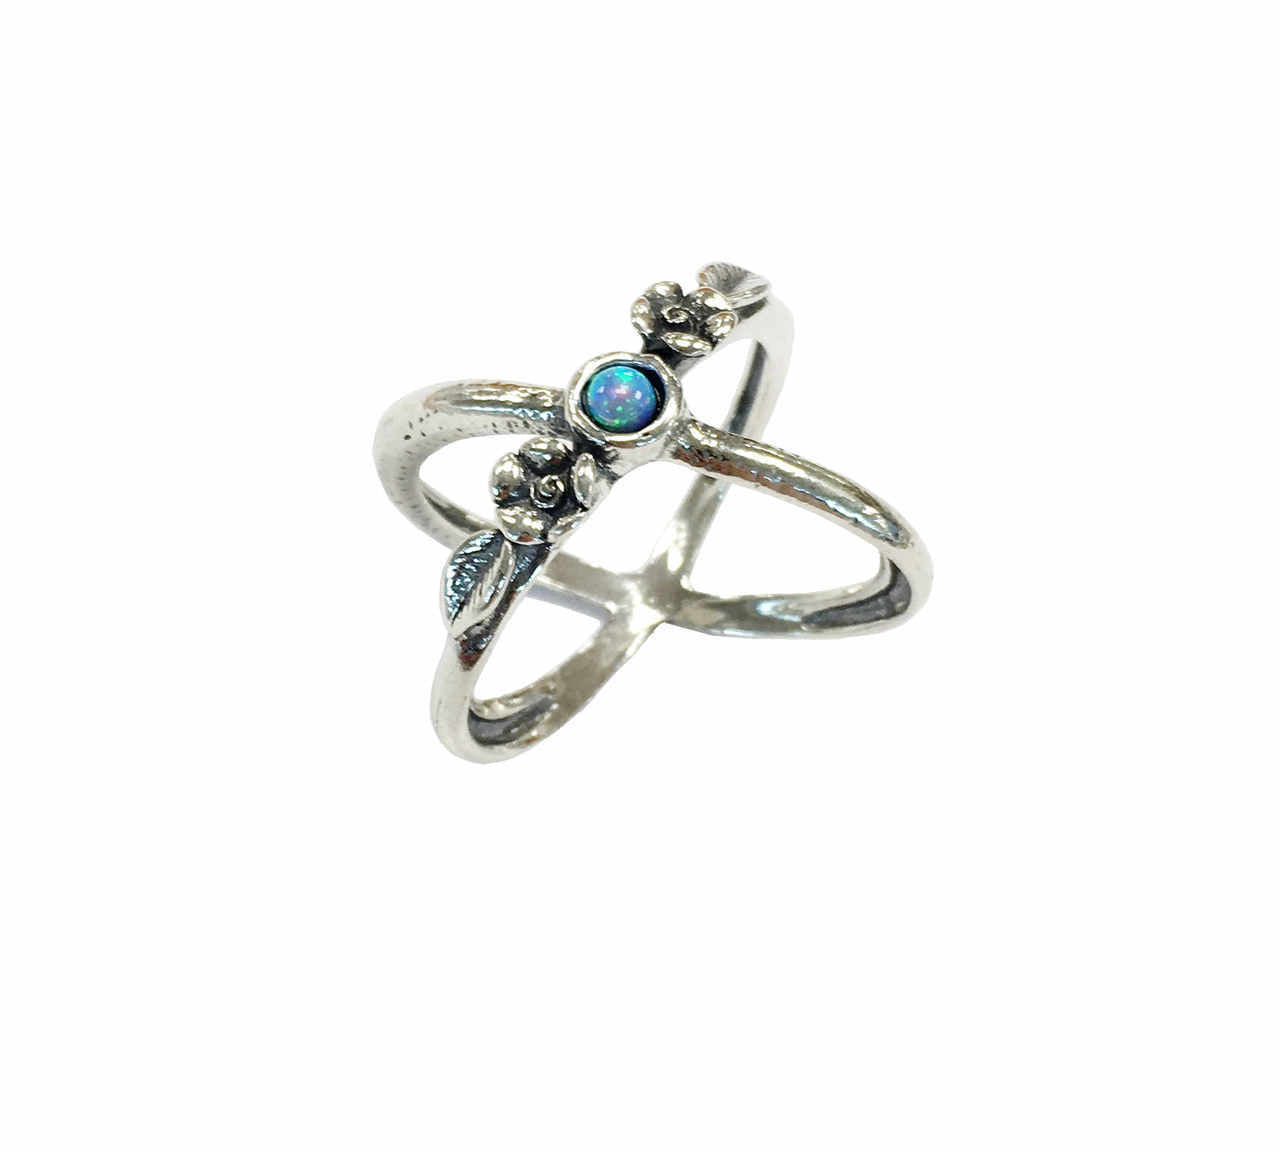 Crossover Opal Ring - The Nancy Smillie Shop - Art, Jewellery & Designer Gifts Glasgow